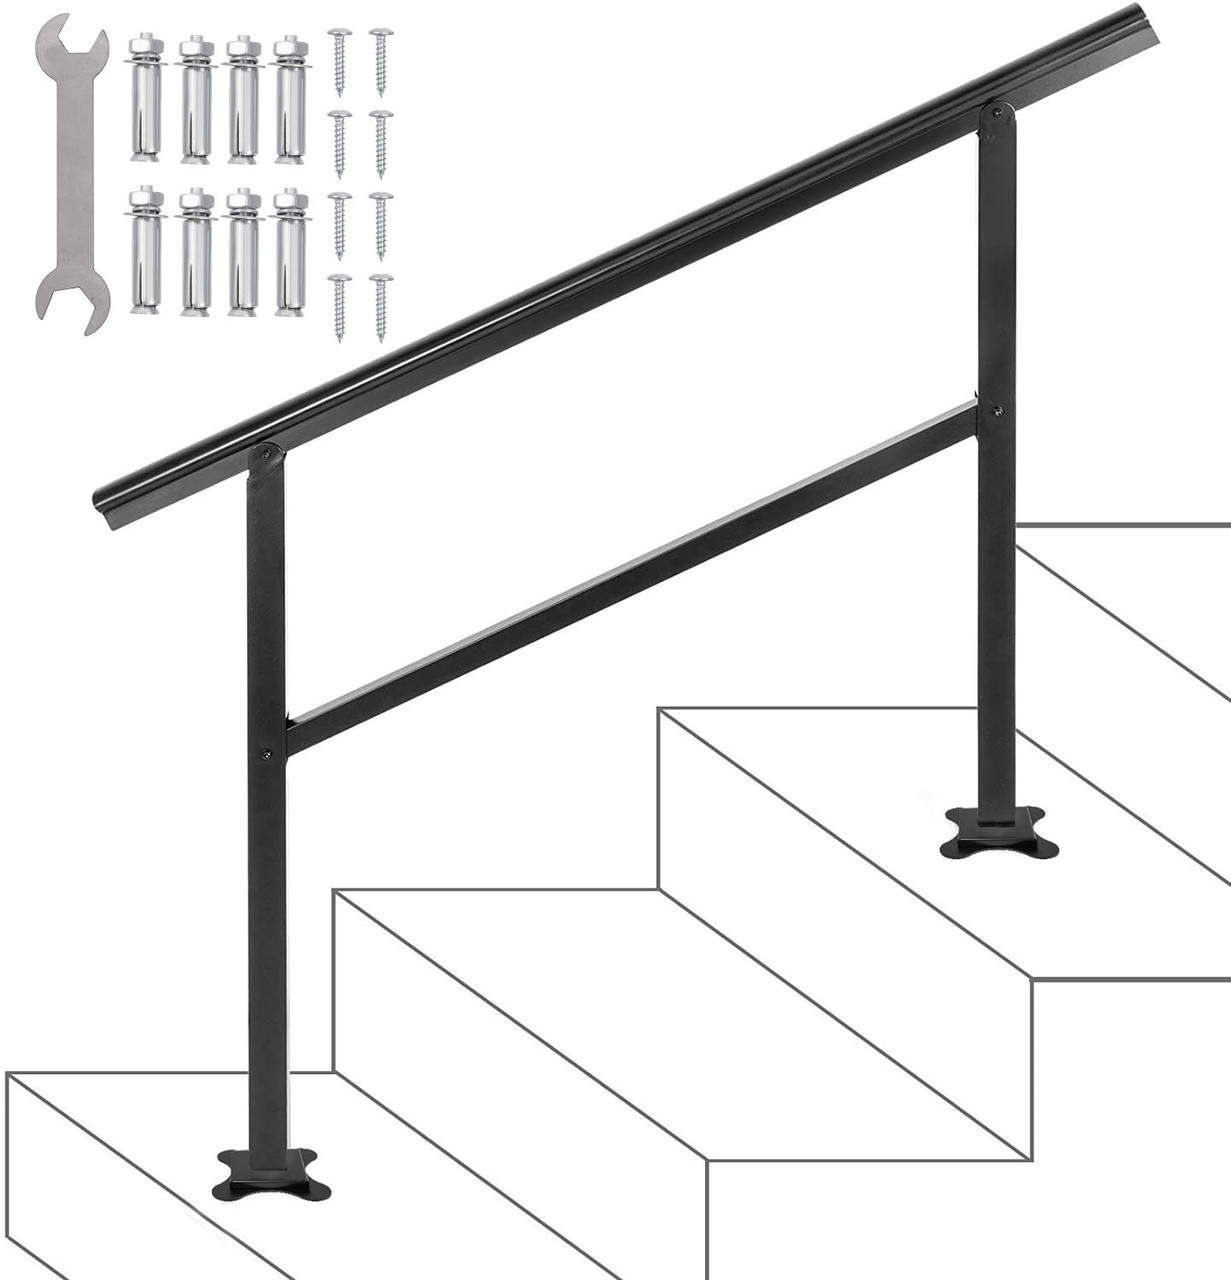 Handrail Outdoor Stairs 47.6 X 35.2 Inch Outdoor Handrail Outdoor Stair Railing Adjustable from 0 to 30 Degrees Handrail for Stairs Outdoor Aluminum Black Stair Railing Fit 3-4 Steps